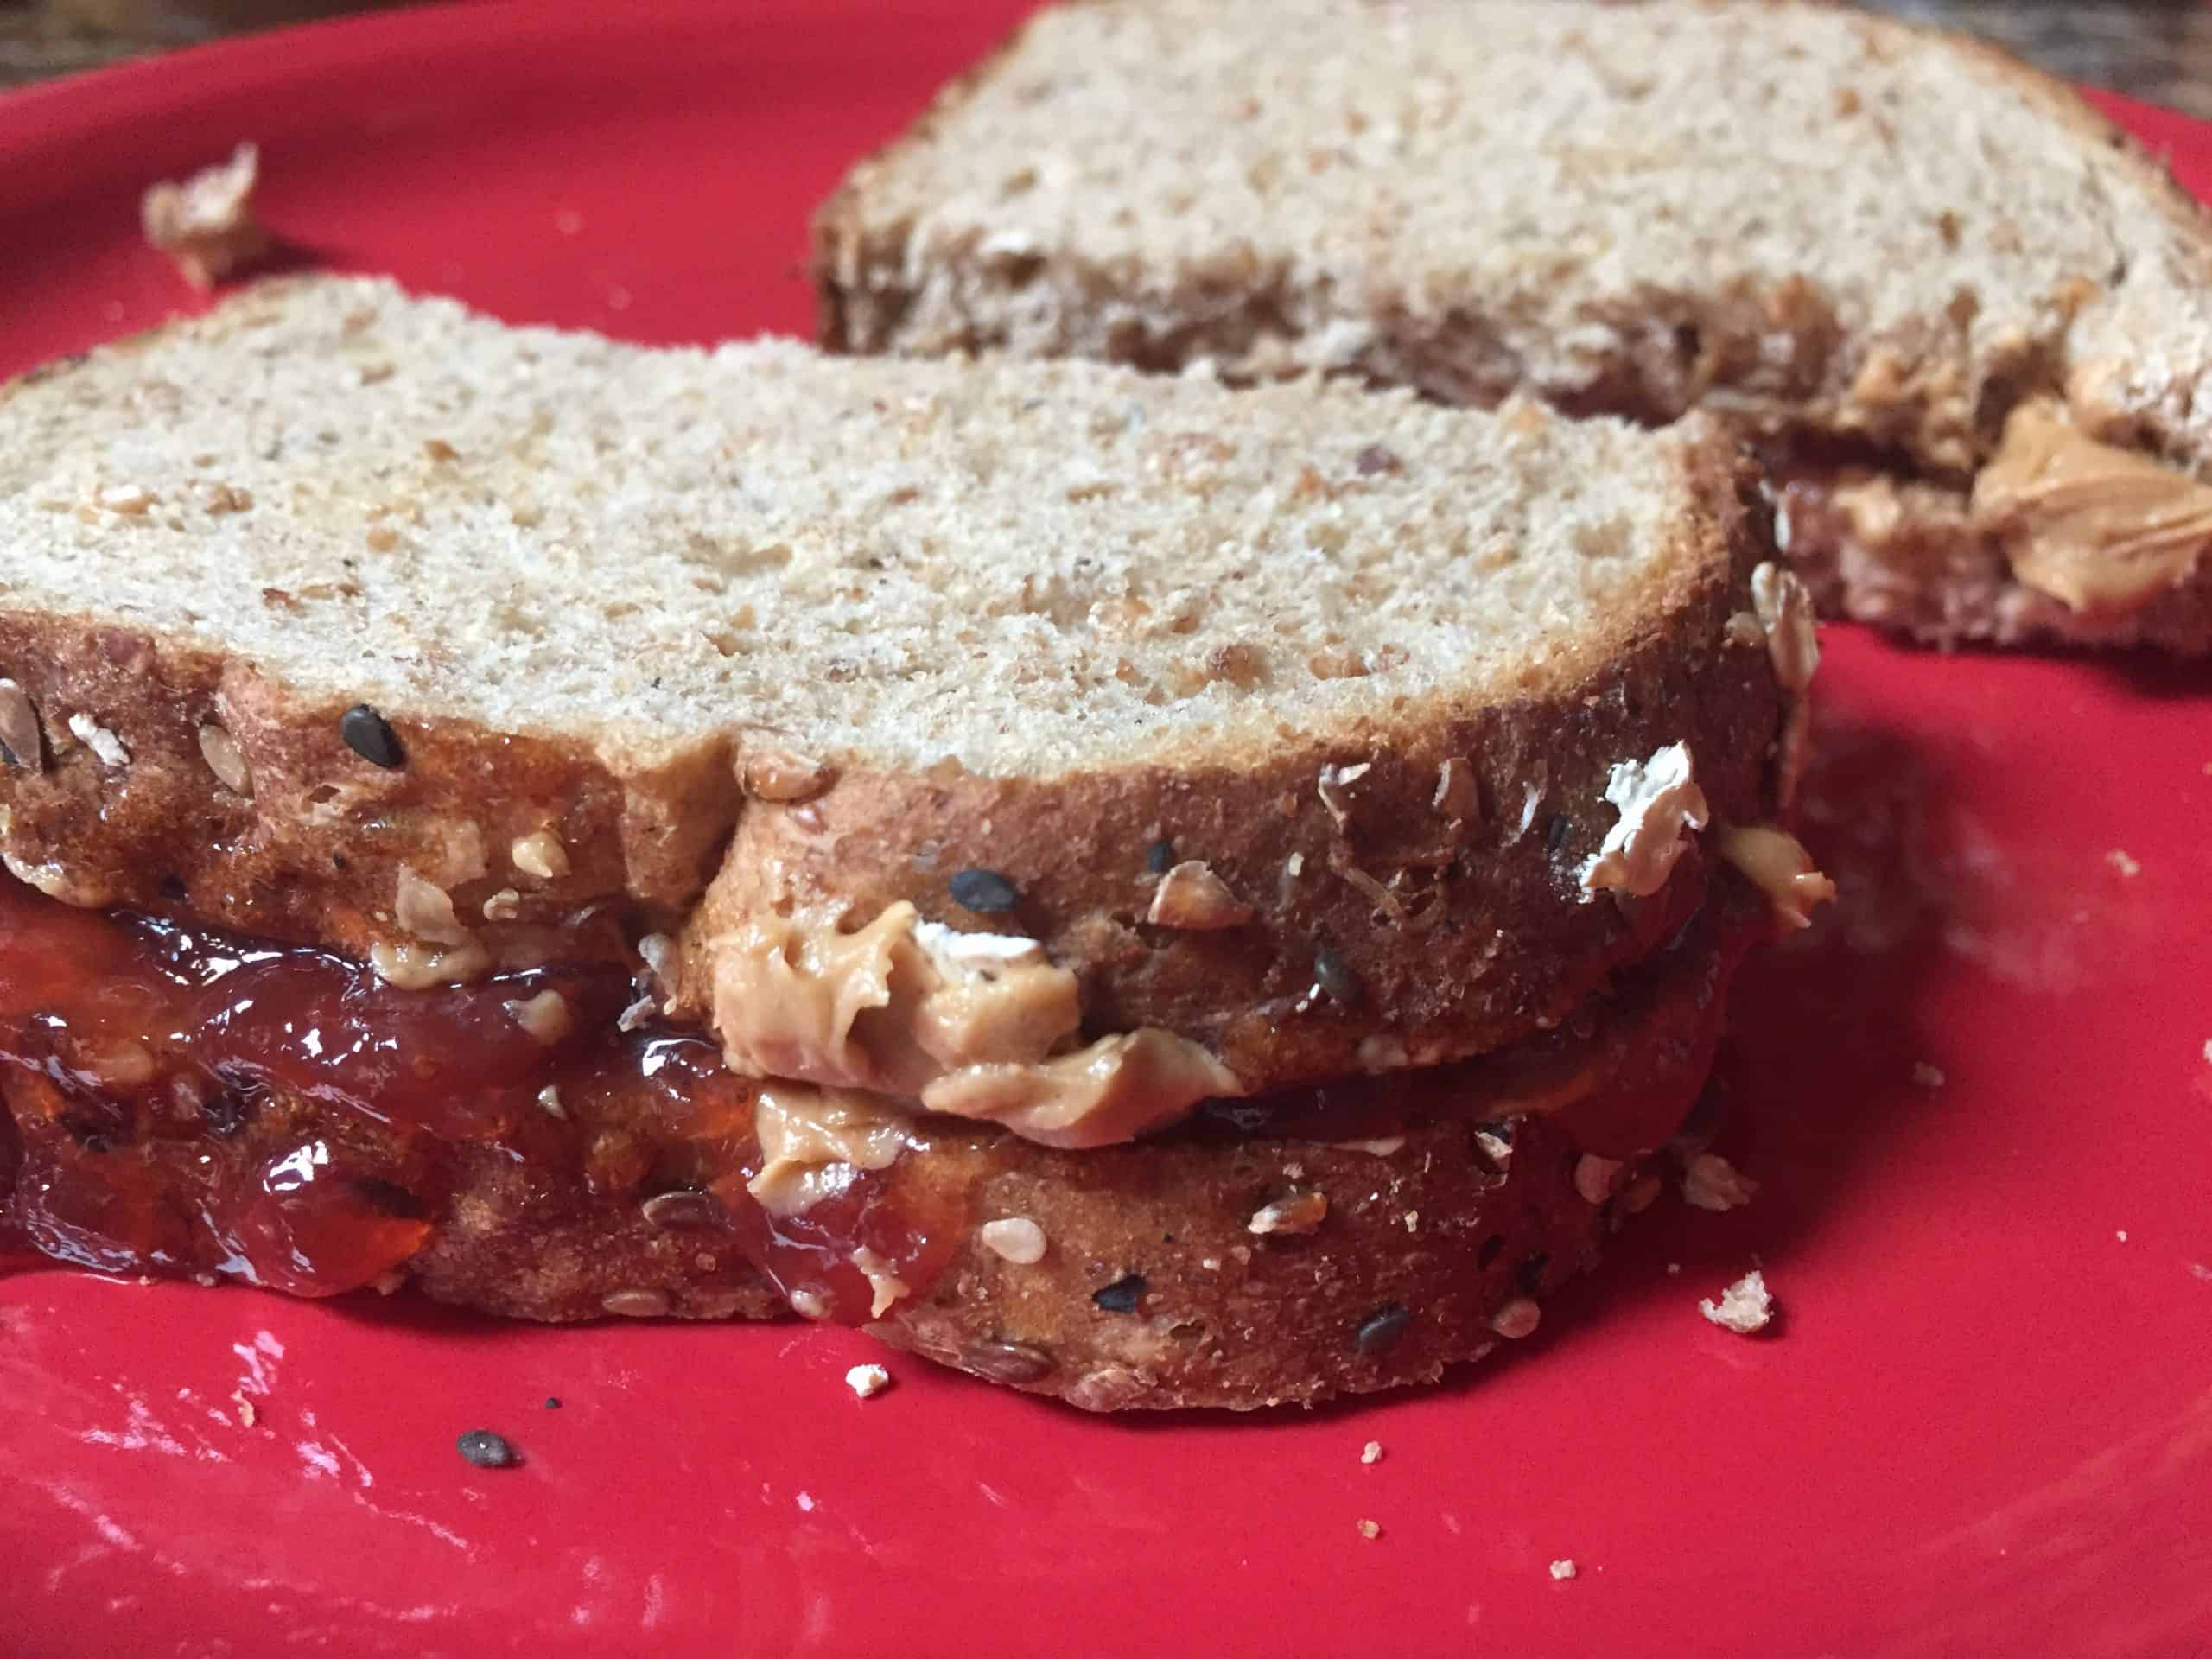 Peanut Butter and Jelly Sandwich ~ You CAN Make it Palm Oil Free!